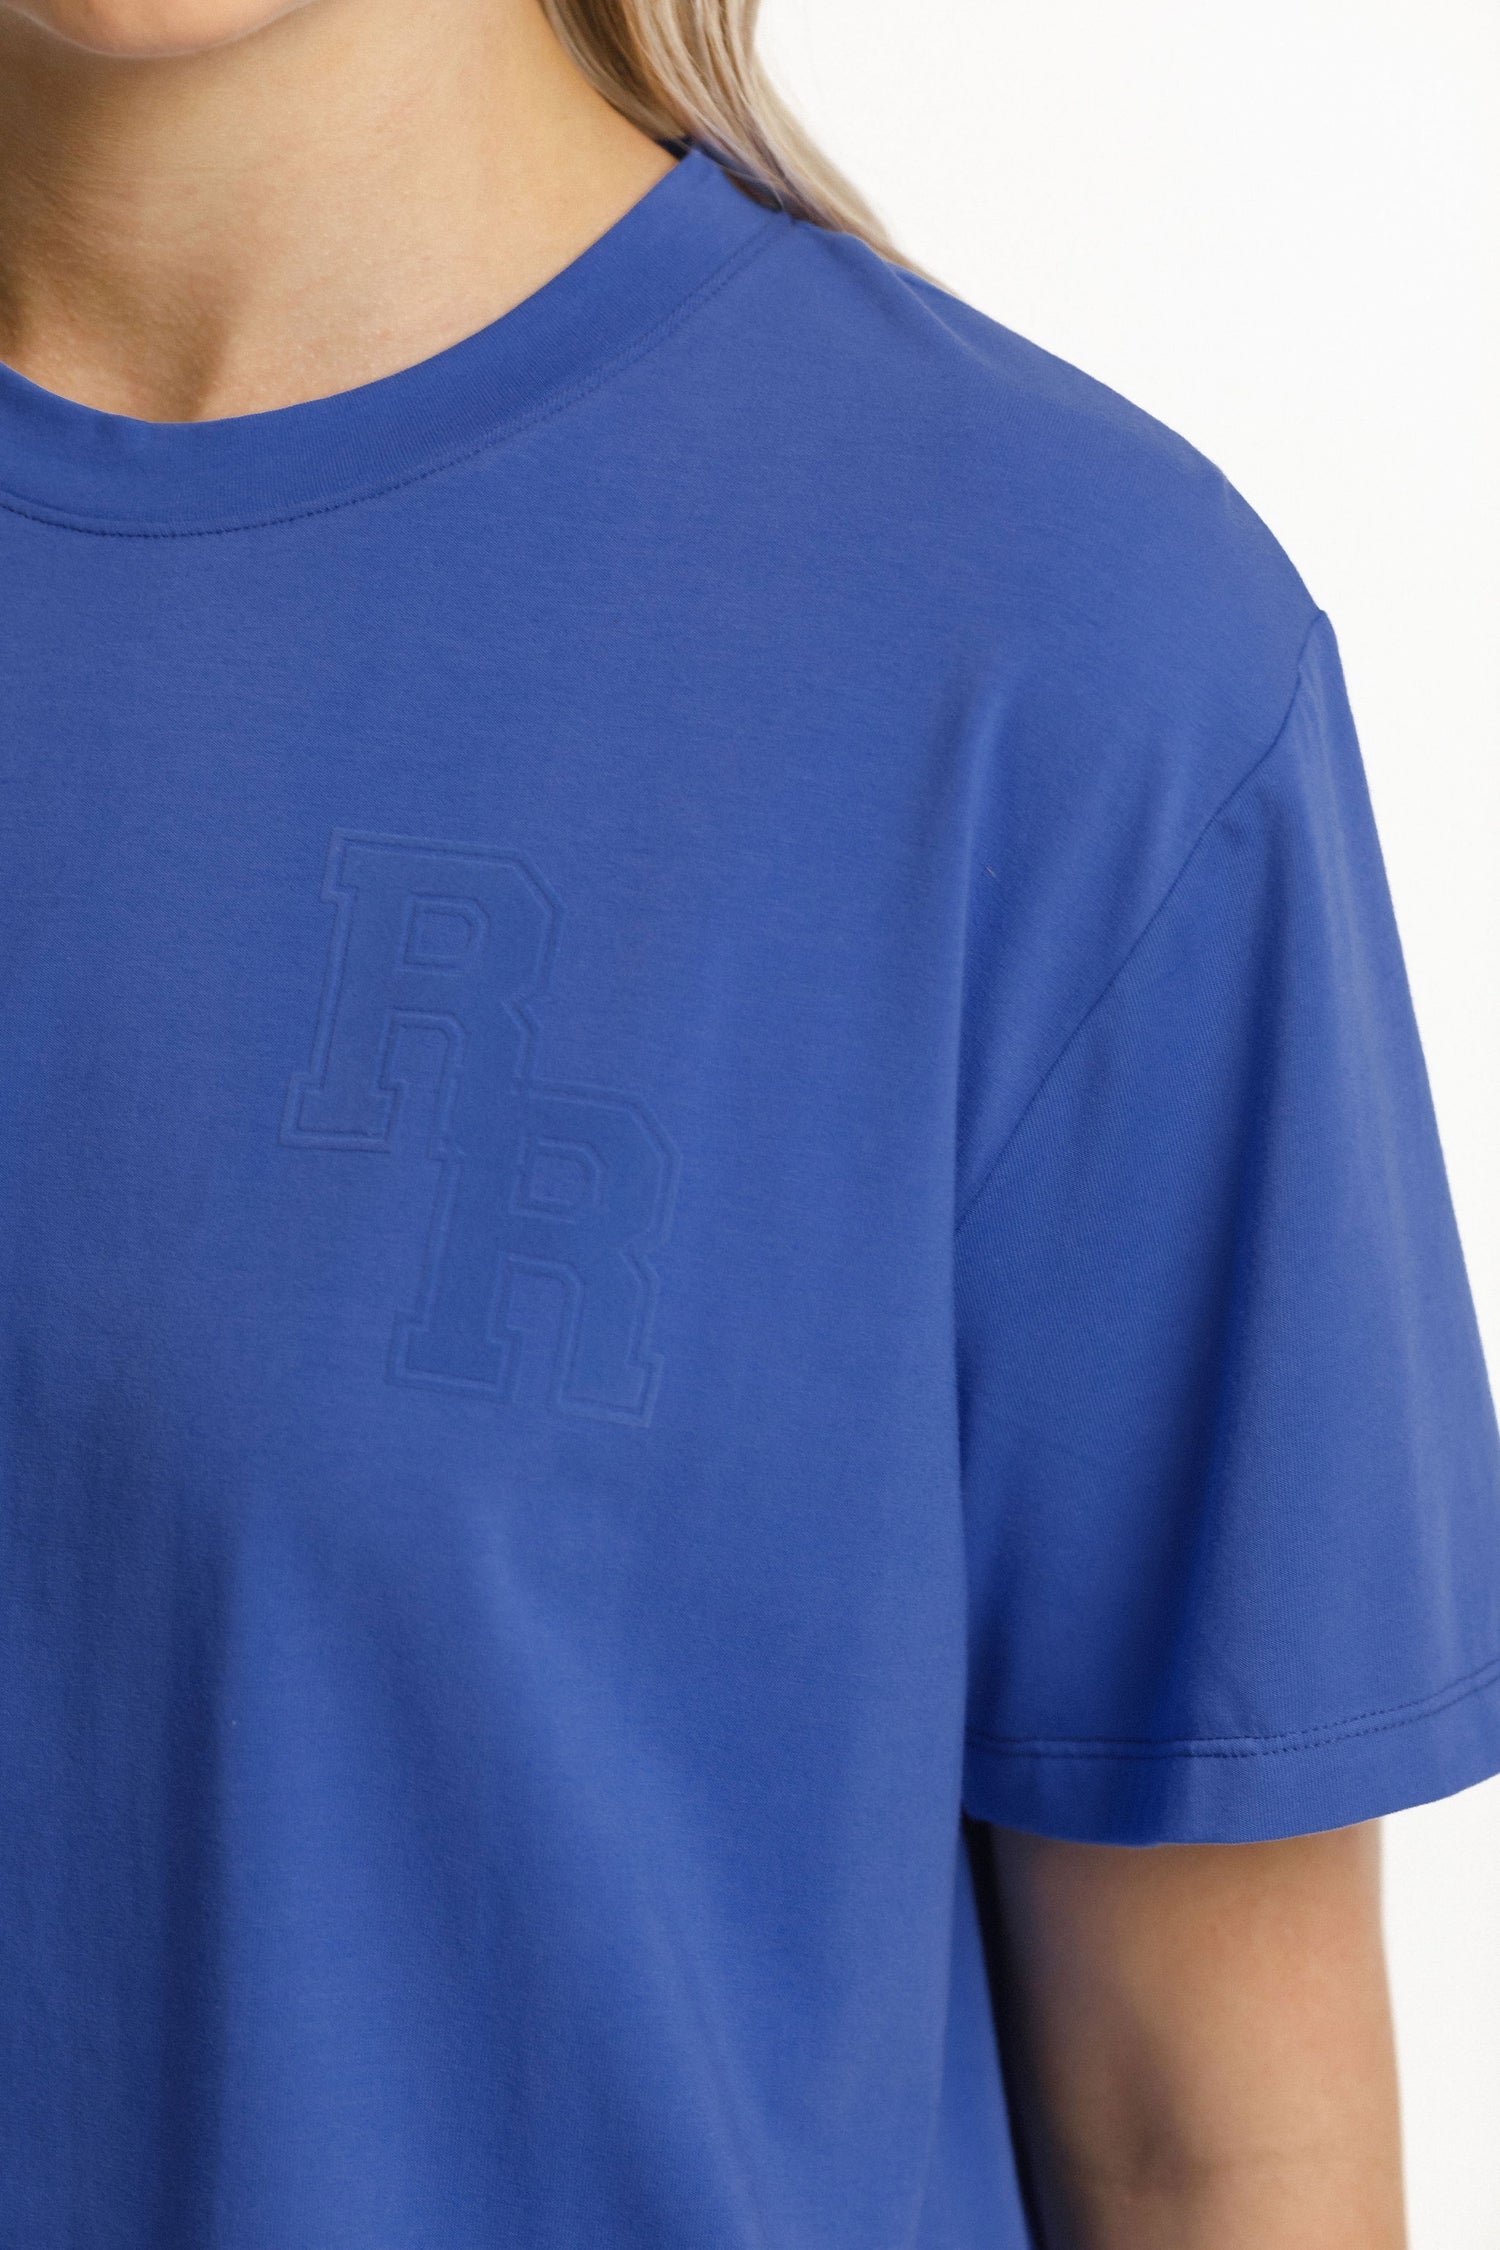 Topher Tee | Sale | Electric Blue